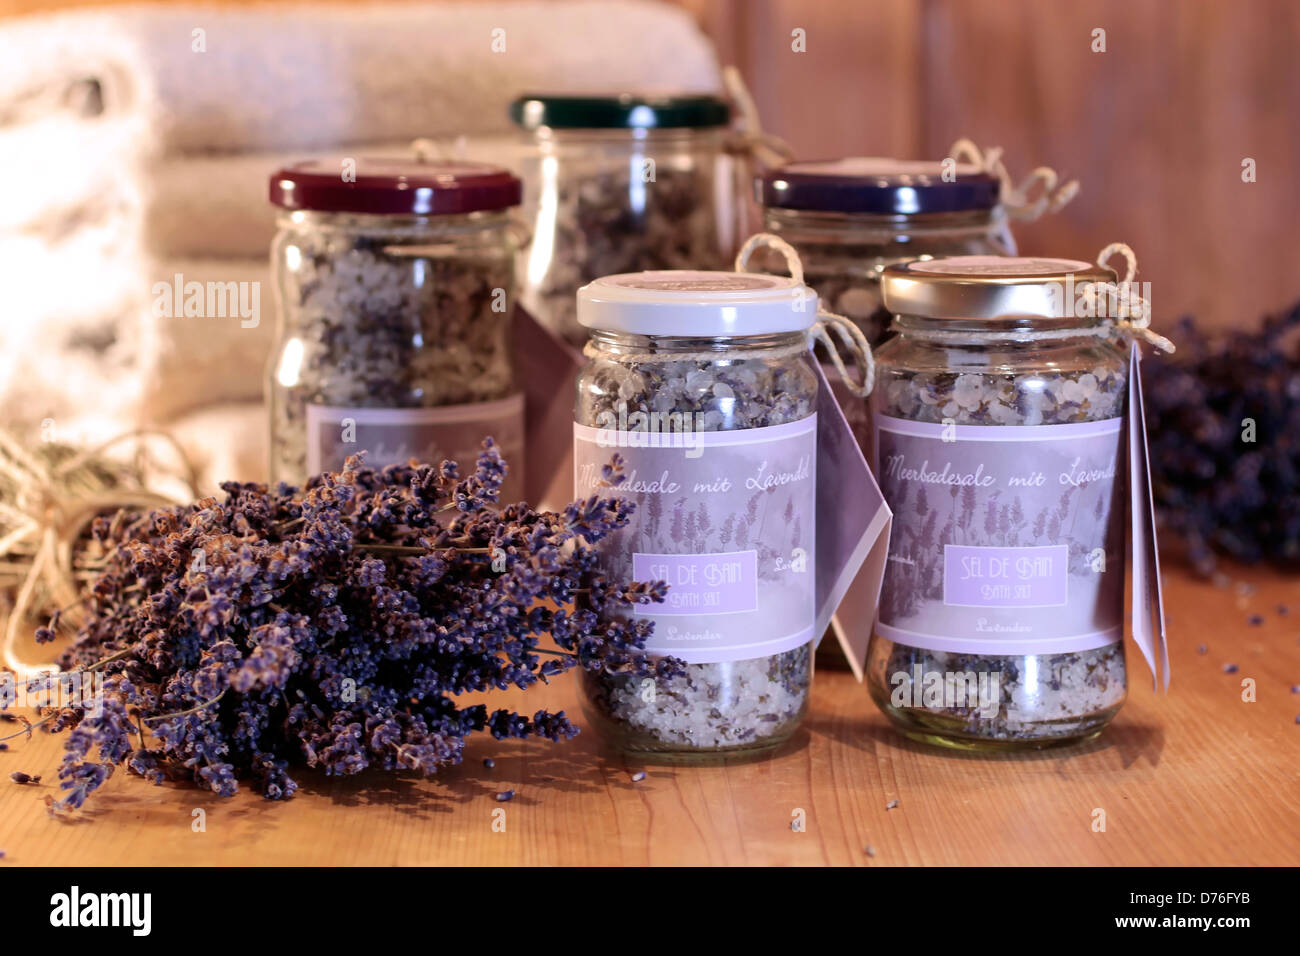 Glasses with home-made bath salt and dried lavender Stock Photo